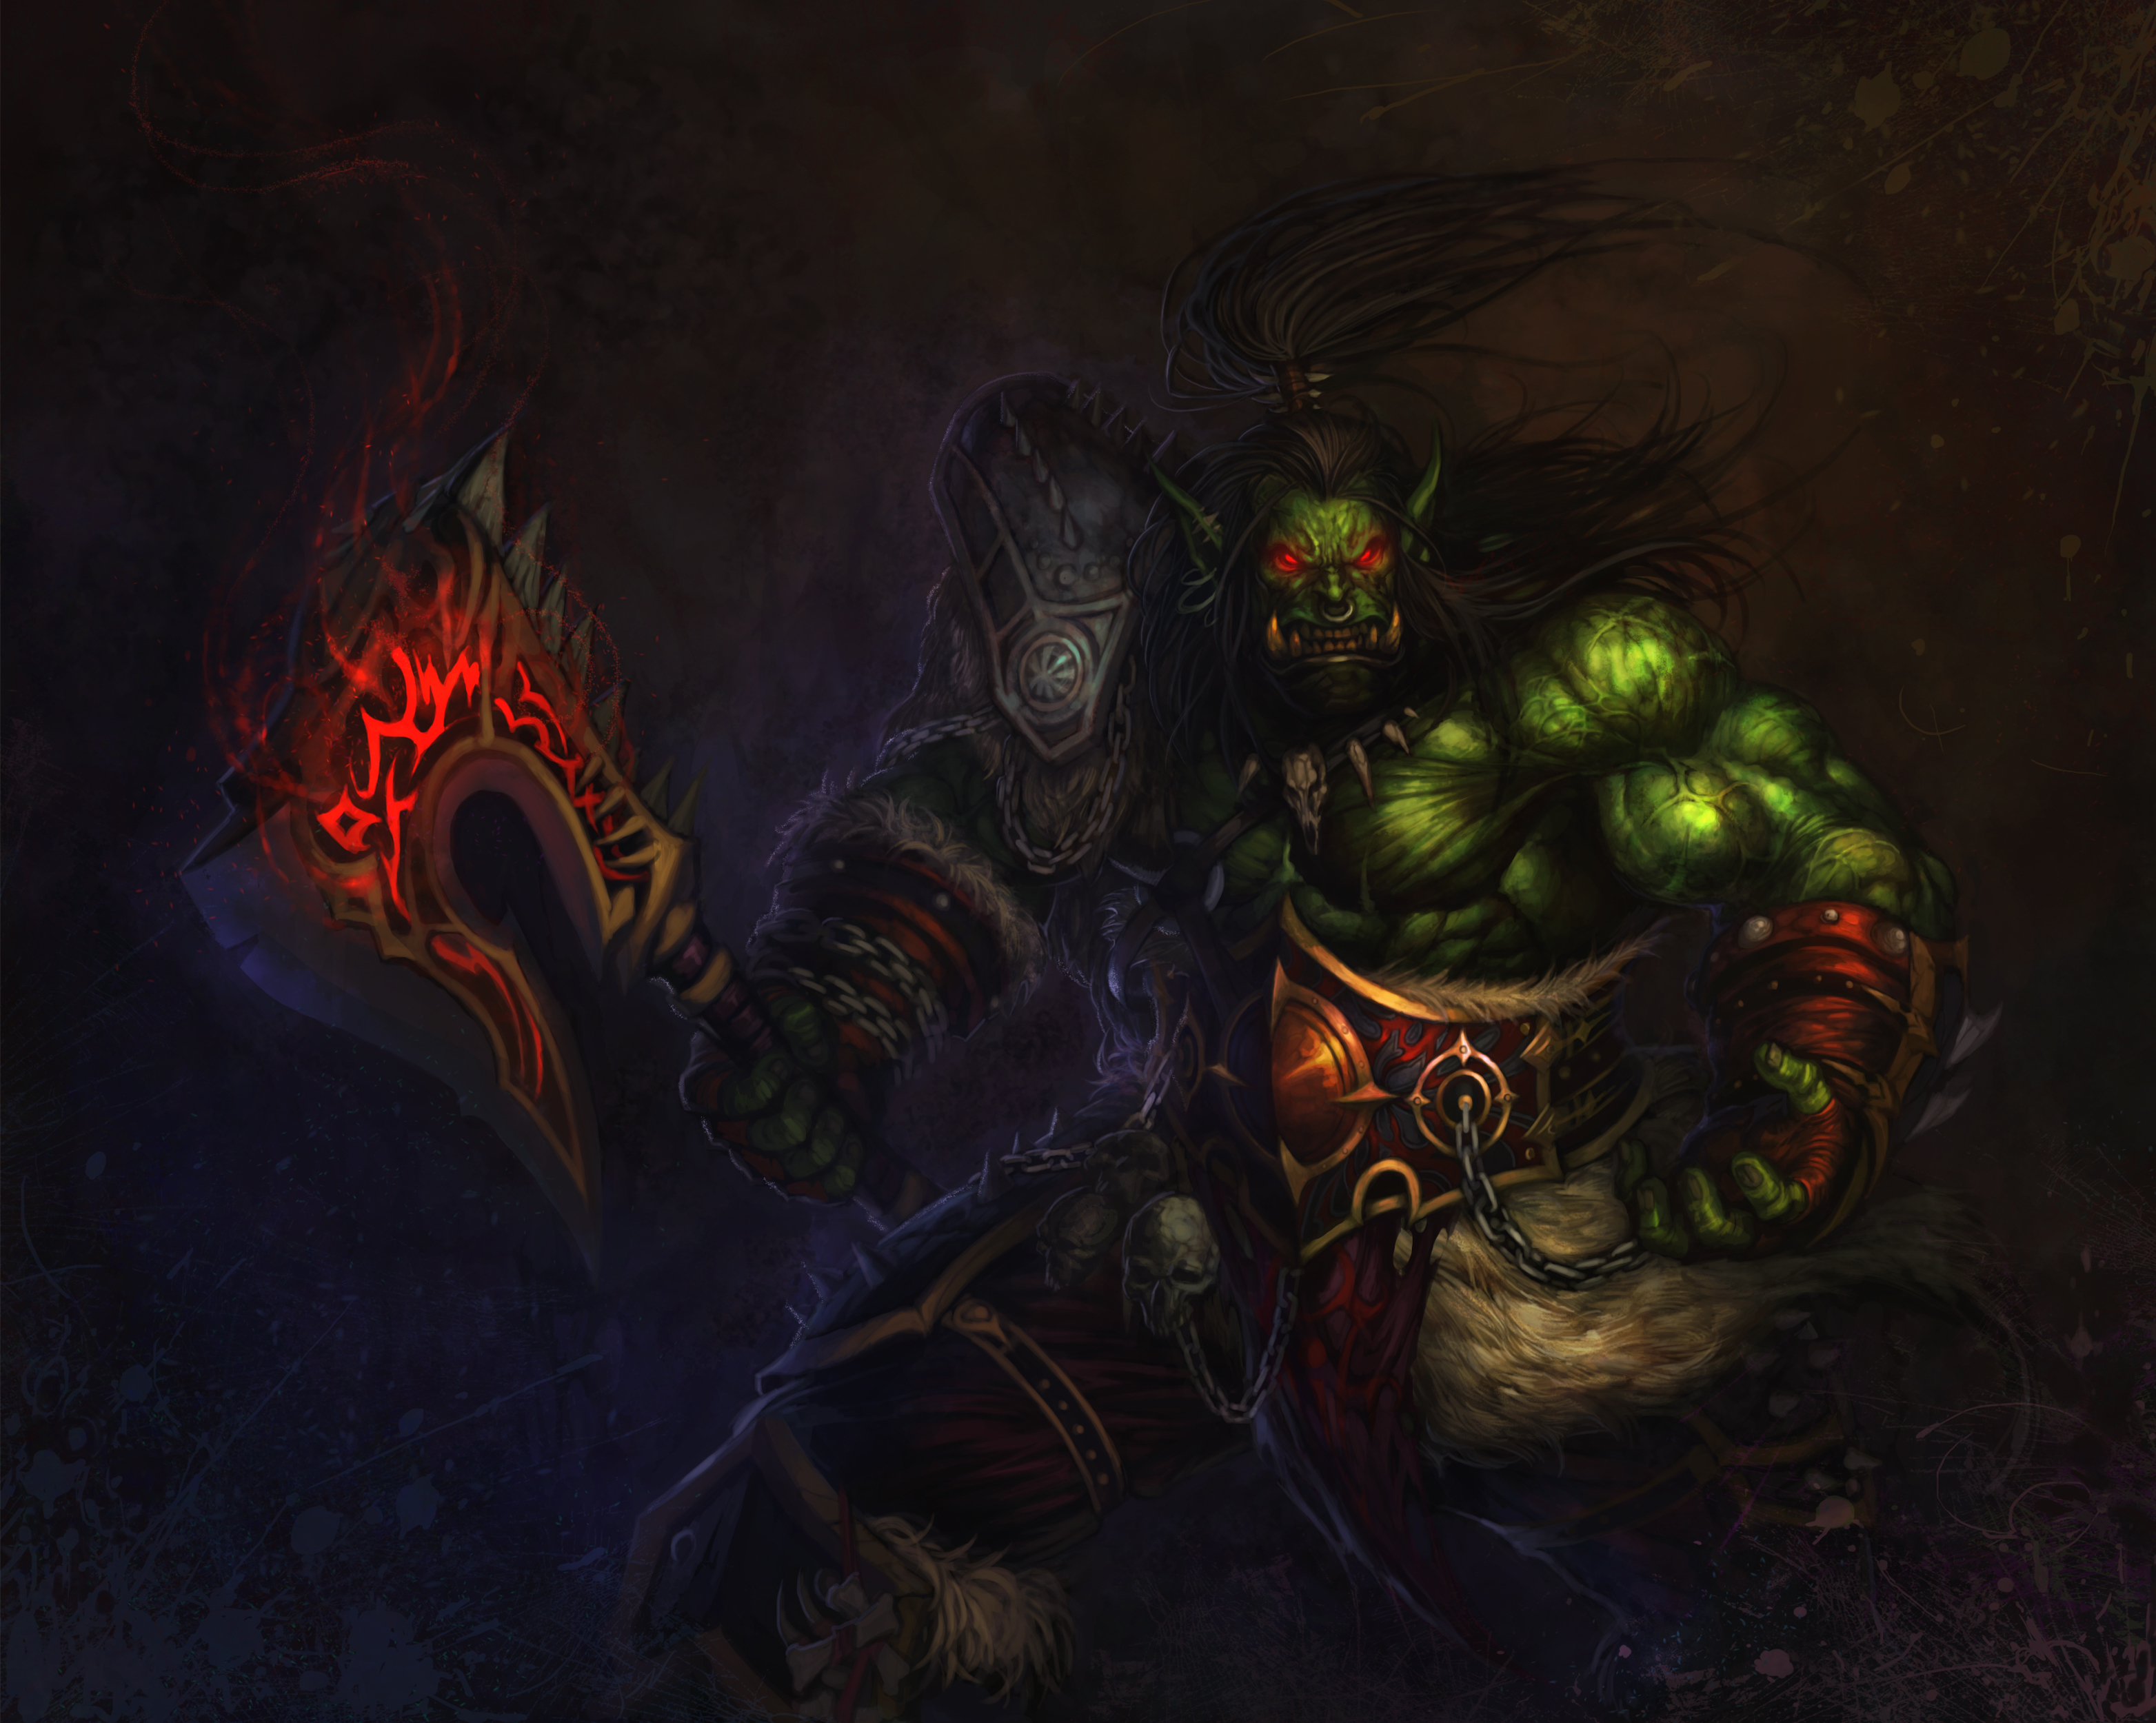 world, Of, Warcraft, Wow, Orc, Warrior, Games, Fantasy Wallpaper